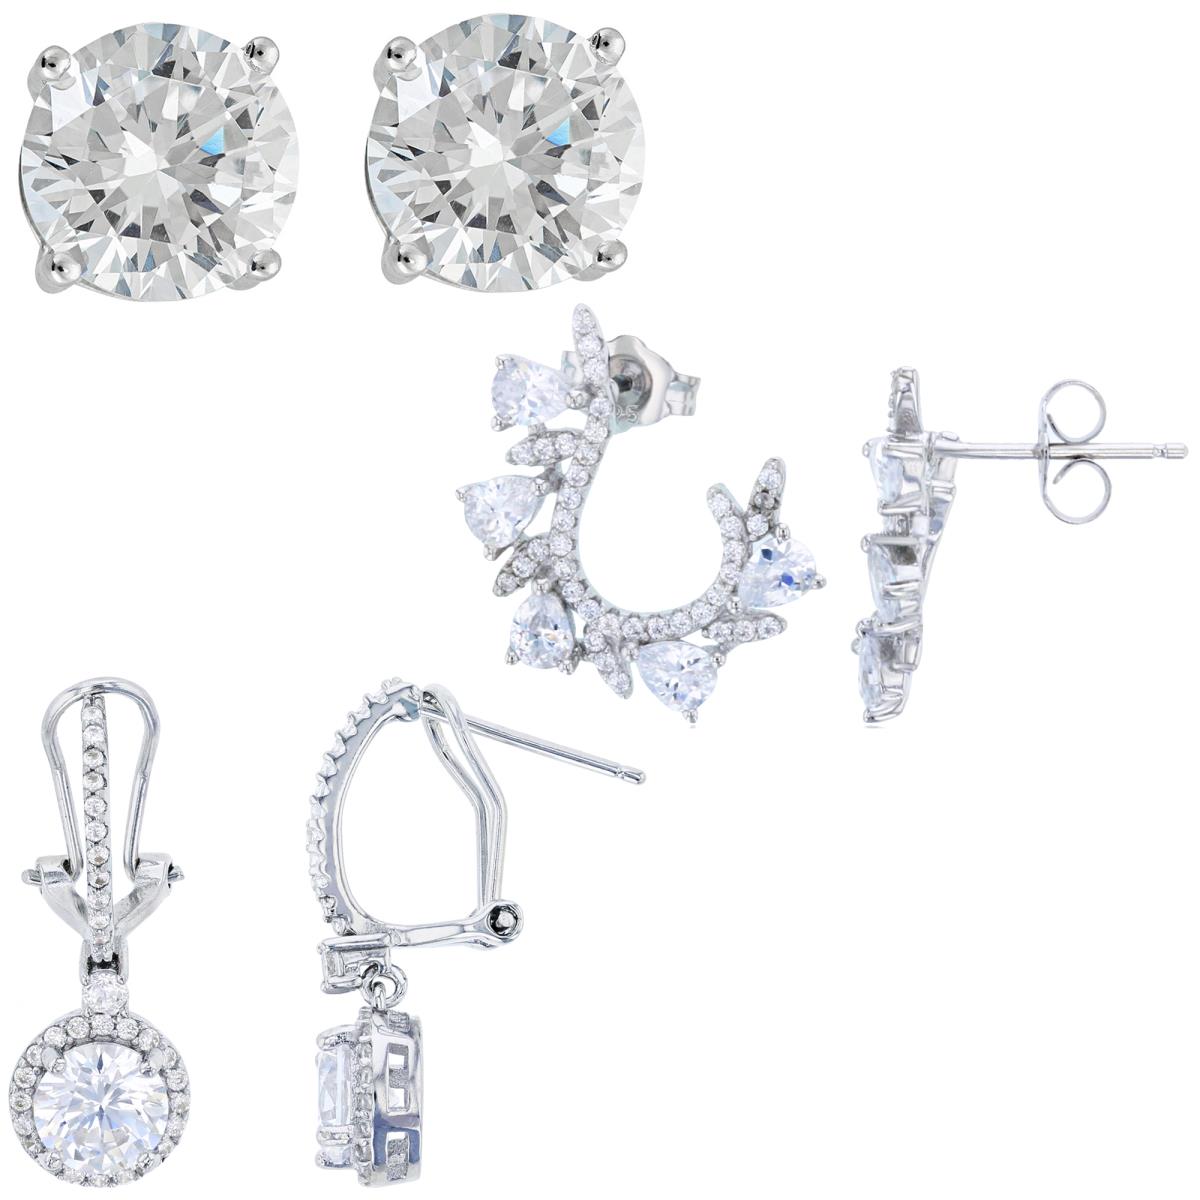 Sterling Silver Rhodium 10mm Rnd Solitaire Studs/PS CZ Crawler & Halo Dangling Omega Back Earrings 3-Units Set